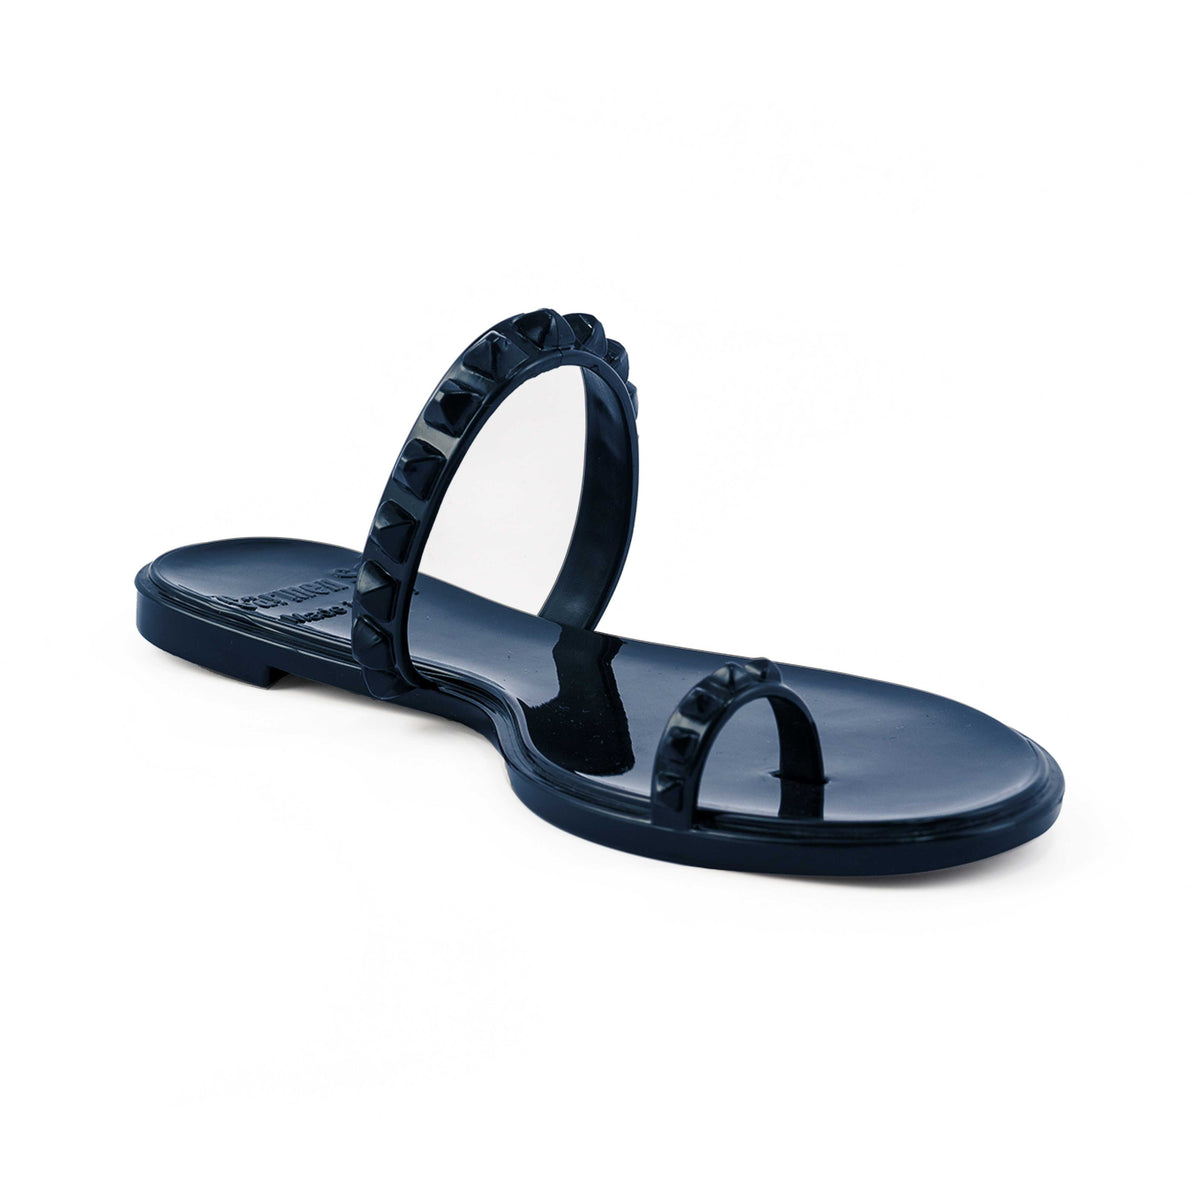 Carmen Sol jelly studded sandals in color navy blue for the pool